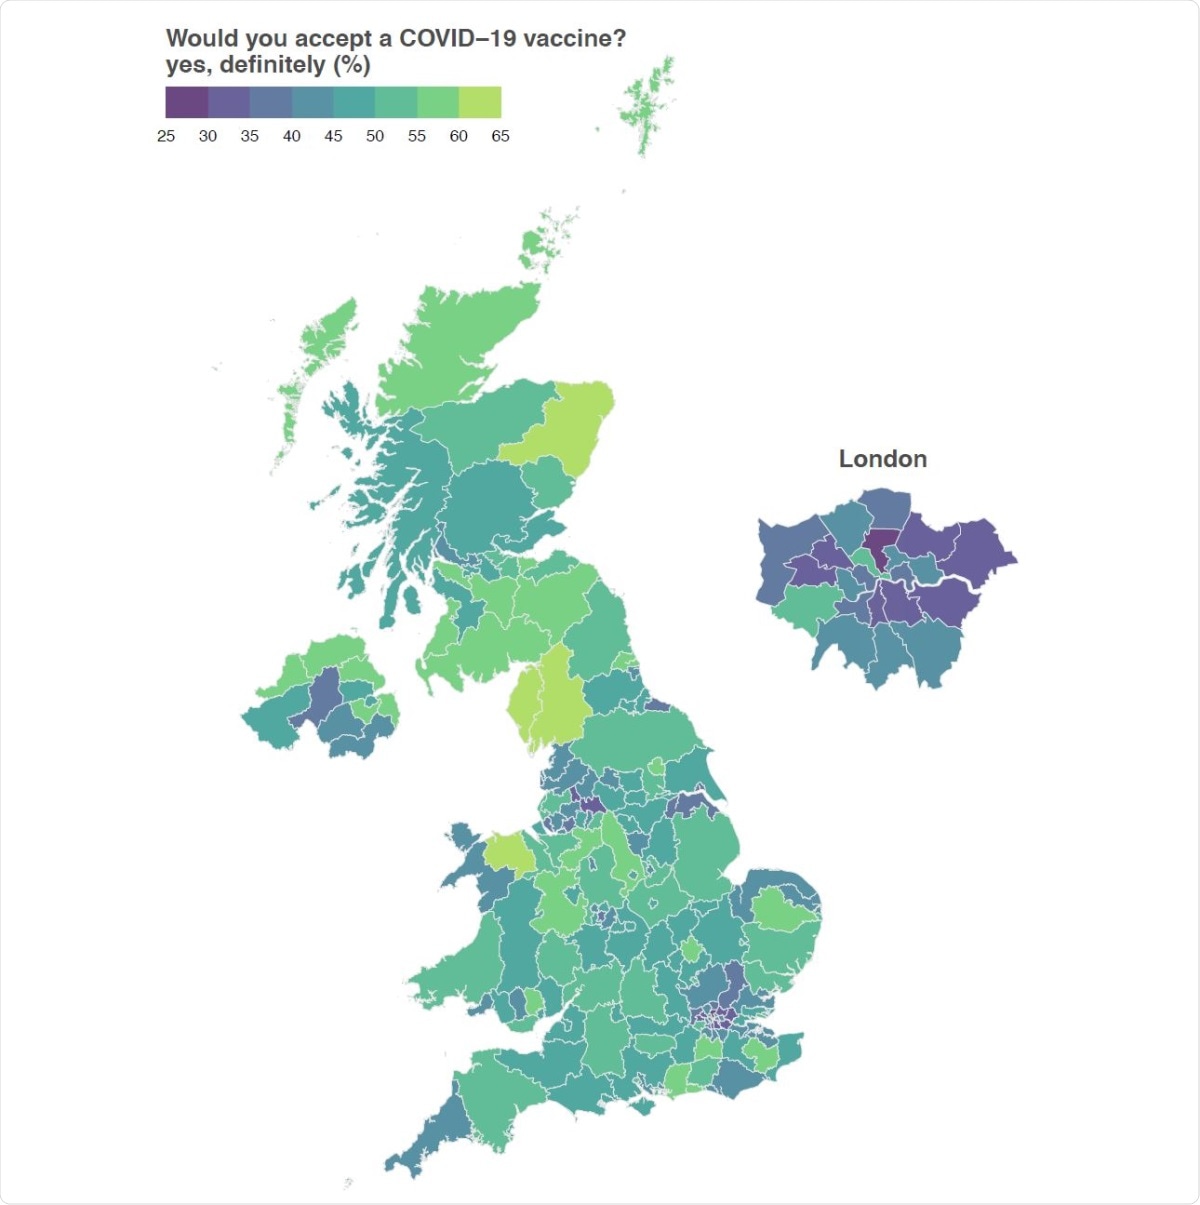 Intent to accept a COVID-19 vaccine. The estimated proportion of respondents in each of the UK’s 174 NUTS3 region who would definitely accept a COVID-19 vaccine are shown.